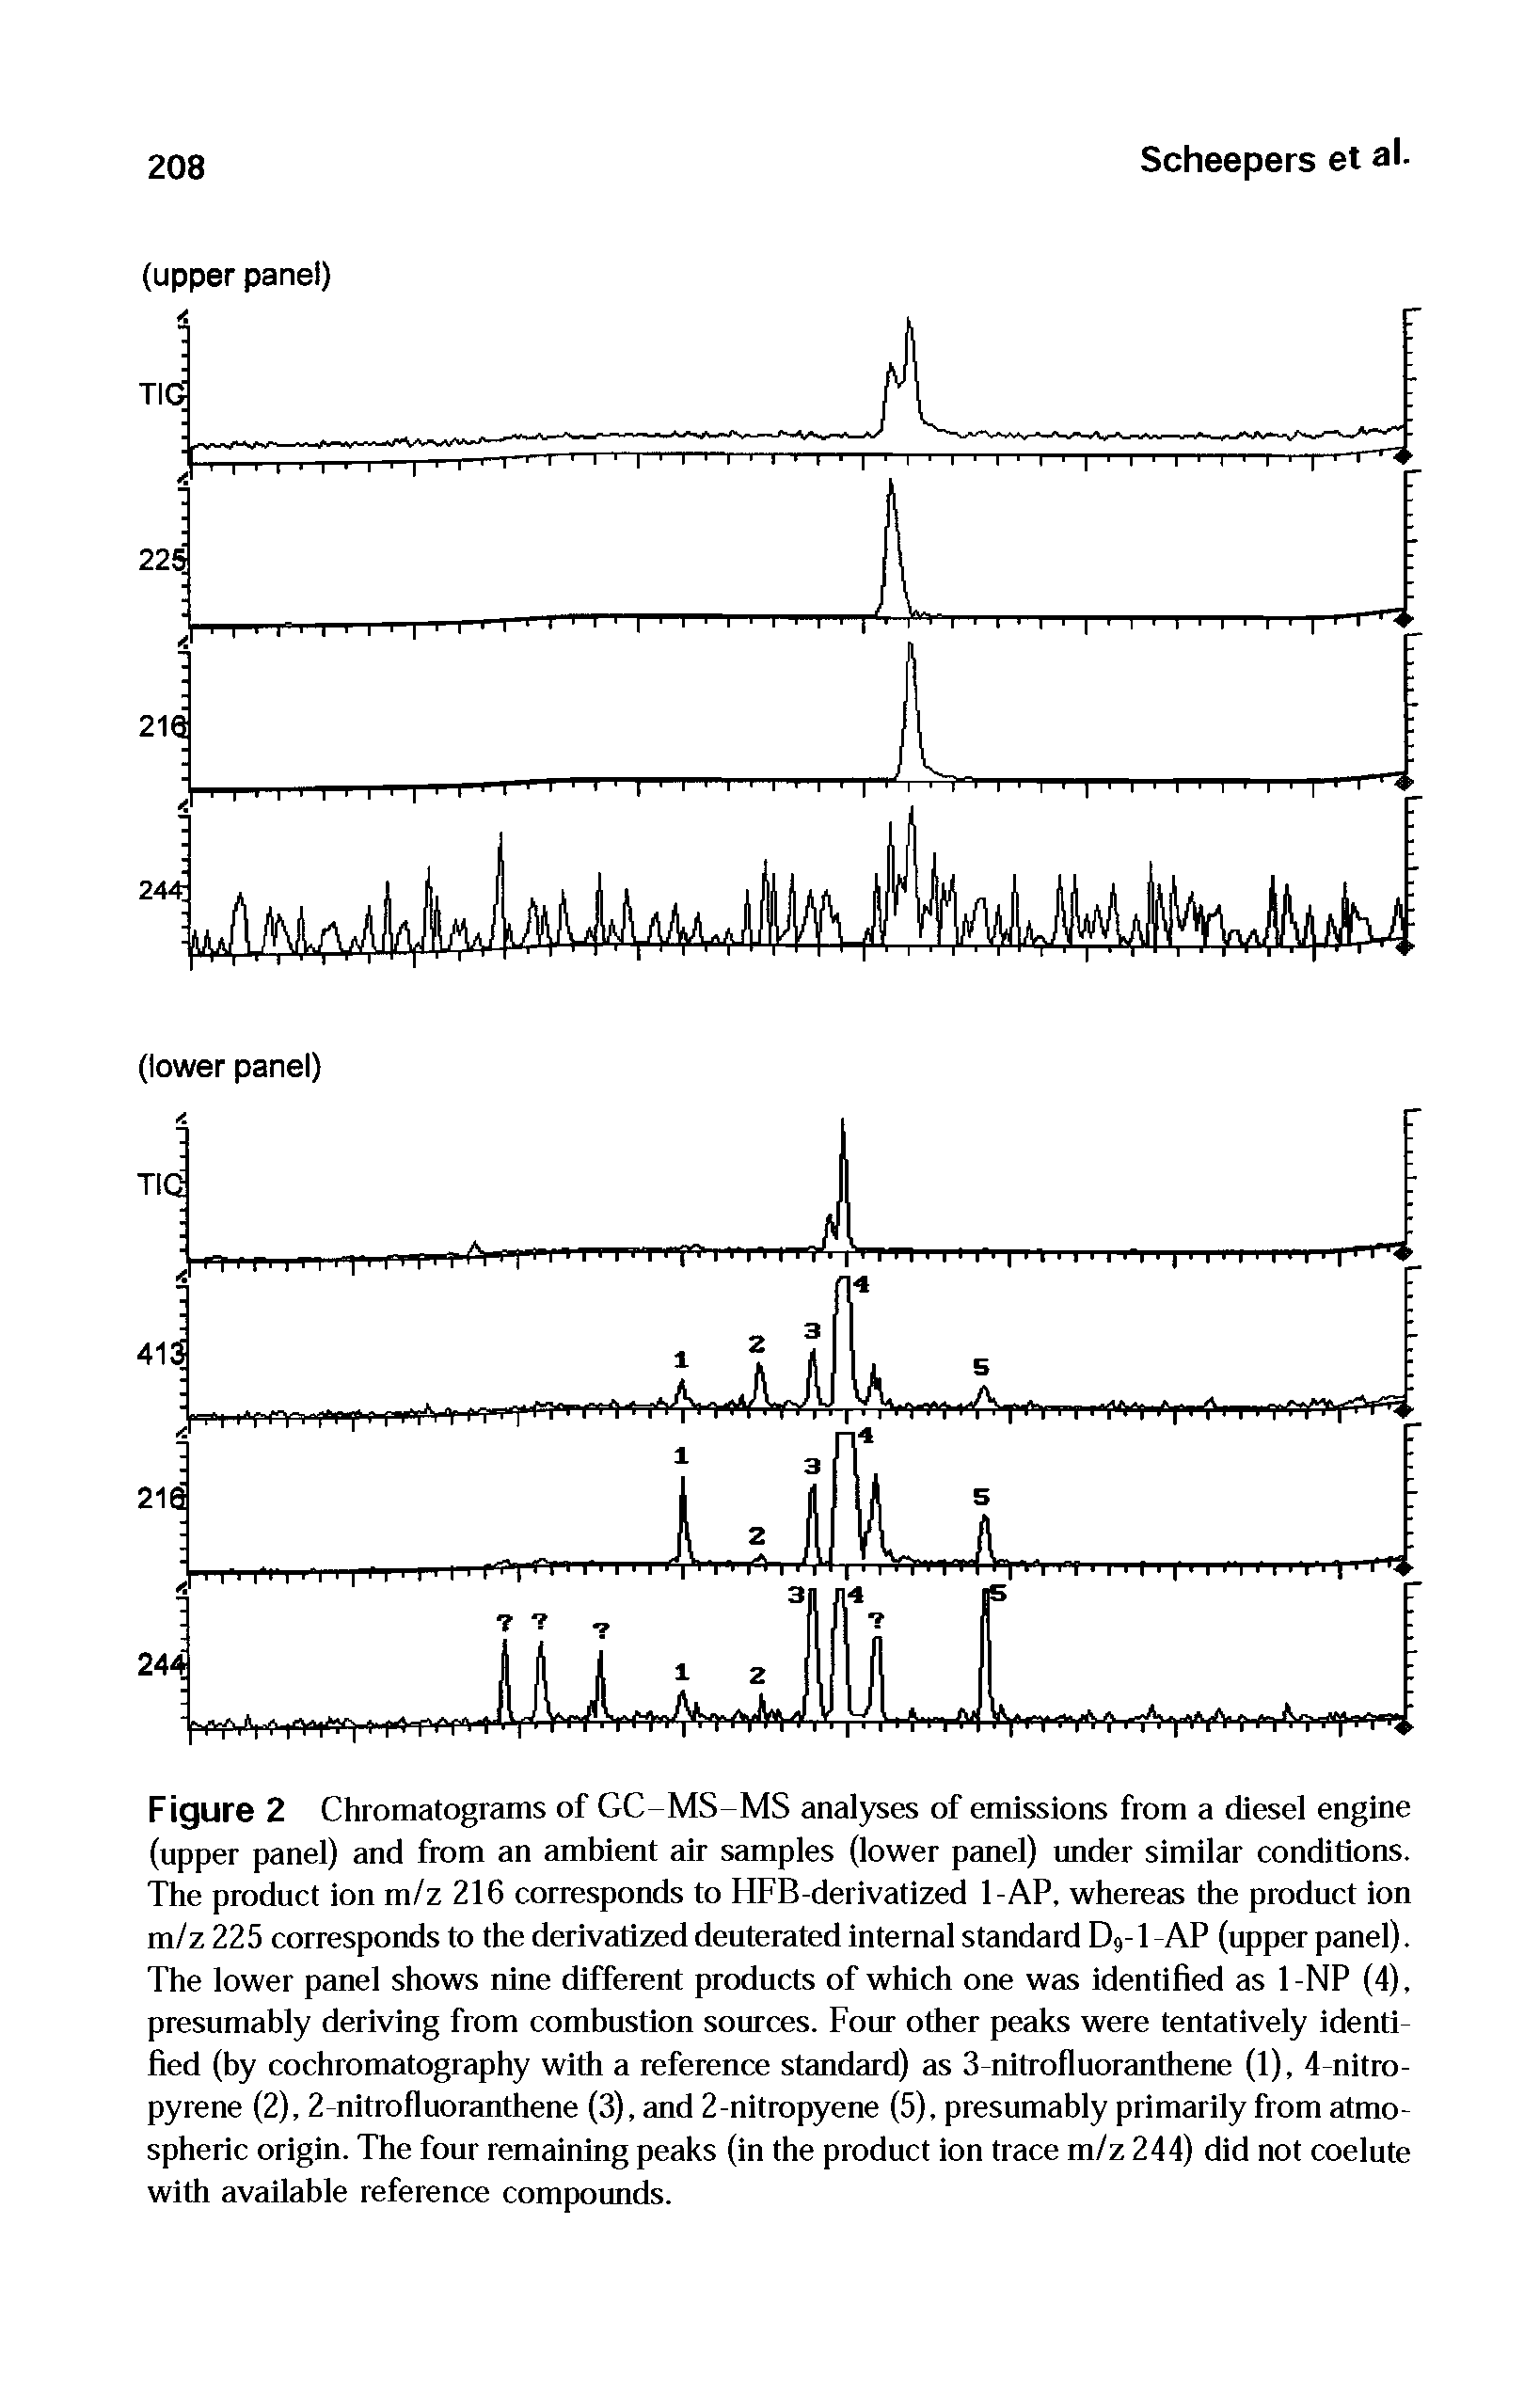 Figure 2 Chromatograms of GC MS-MS analyses of emissions from a diesel engine (upper panel) and from an ambient air samples (lower panel) under similar conditions. The product ion m/z 216 corresponds to HFB-derivatized 1-AP, whereas the product ion m/z 225 corresponds to the derivatized deuterated internal standard D9-I -AP (upper panel). The lower panel shows nine different products of which one was identified as 1-NP (4), presumably deriving from combustion sources. Four other peaks were tentatively identified (by cochromatography with a reference standard) as 3-nitrofluoranthene (1), 4-nitro-pyrene (2), 2-nitrofluoranthene (3), and 2-nitropyene (5), presumably primarily from atmospheric origin. The four remaining peaks (in the product ion trace m/z 244) did not coelute with available reference compounds.